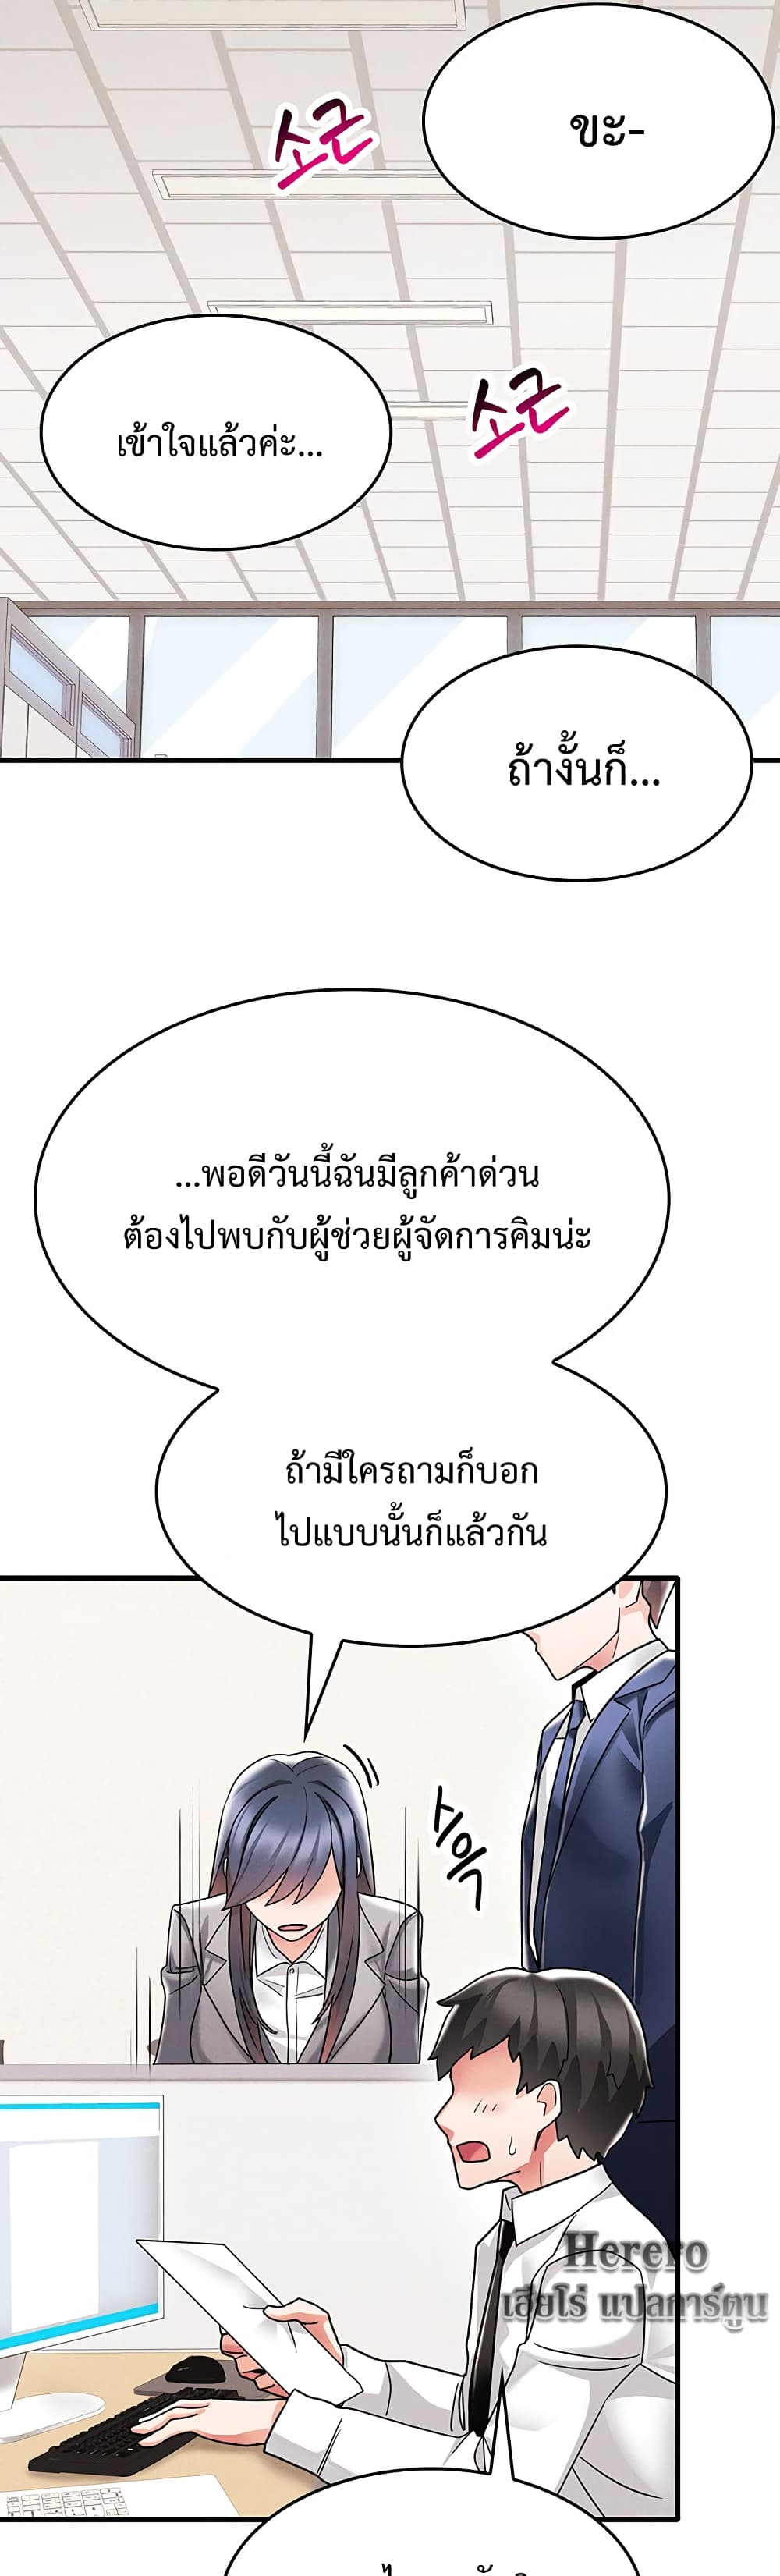 Relationship Reverse Button: Let’s Make Her Submissive 3 ภาพที่ 37